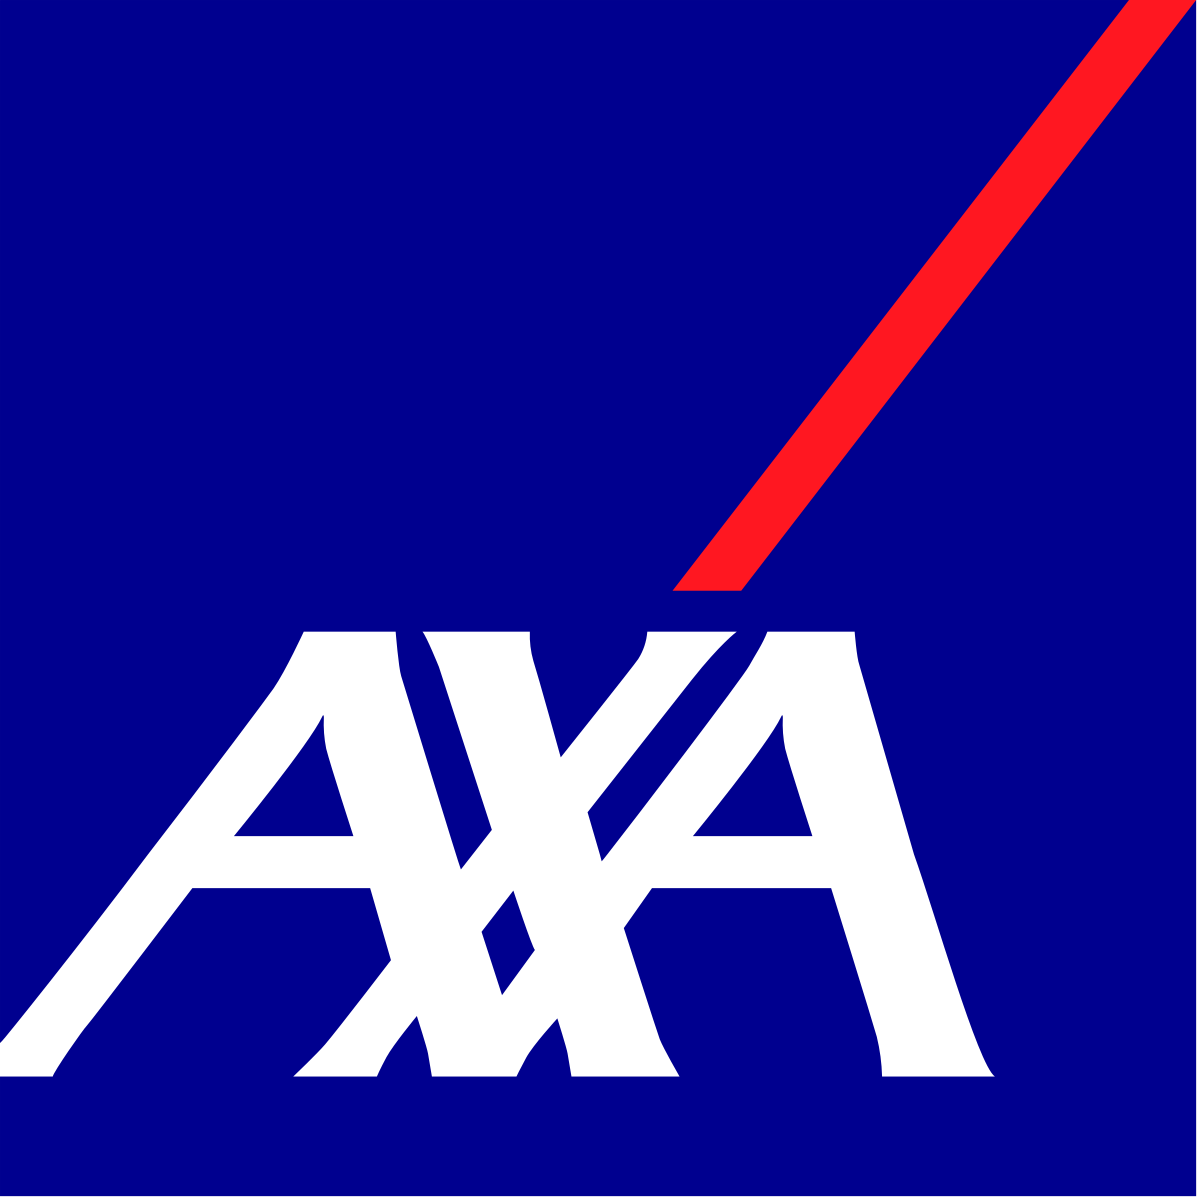 AXA Group grows revenue by 2% in Q1 2021